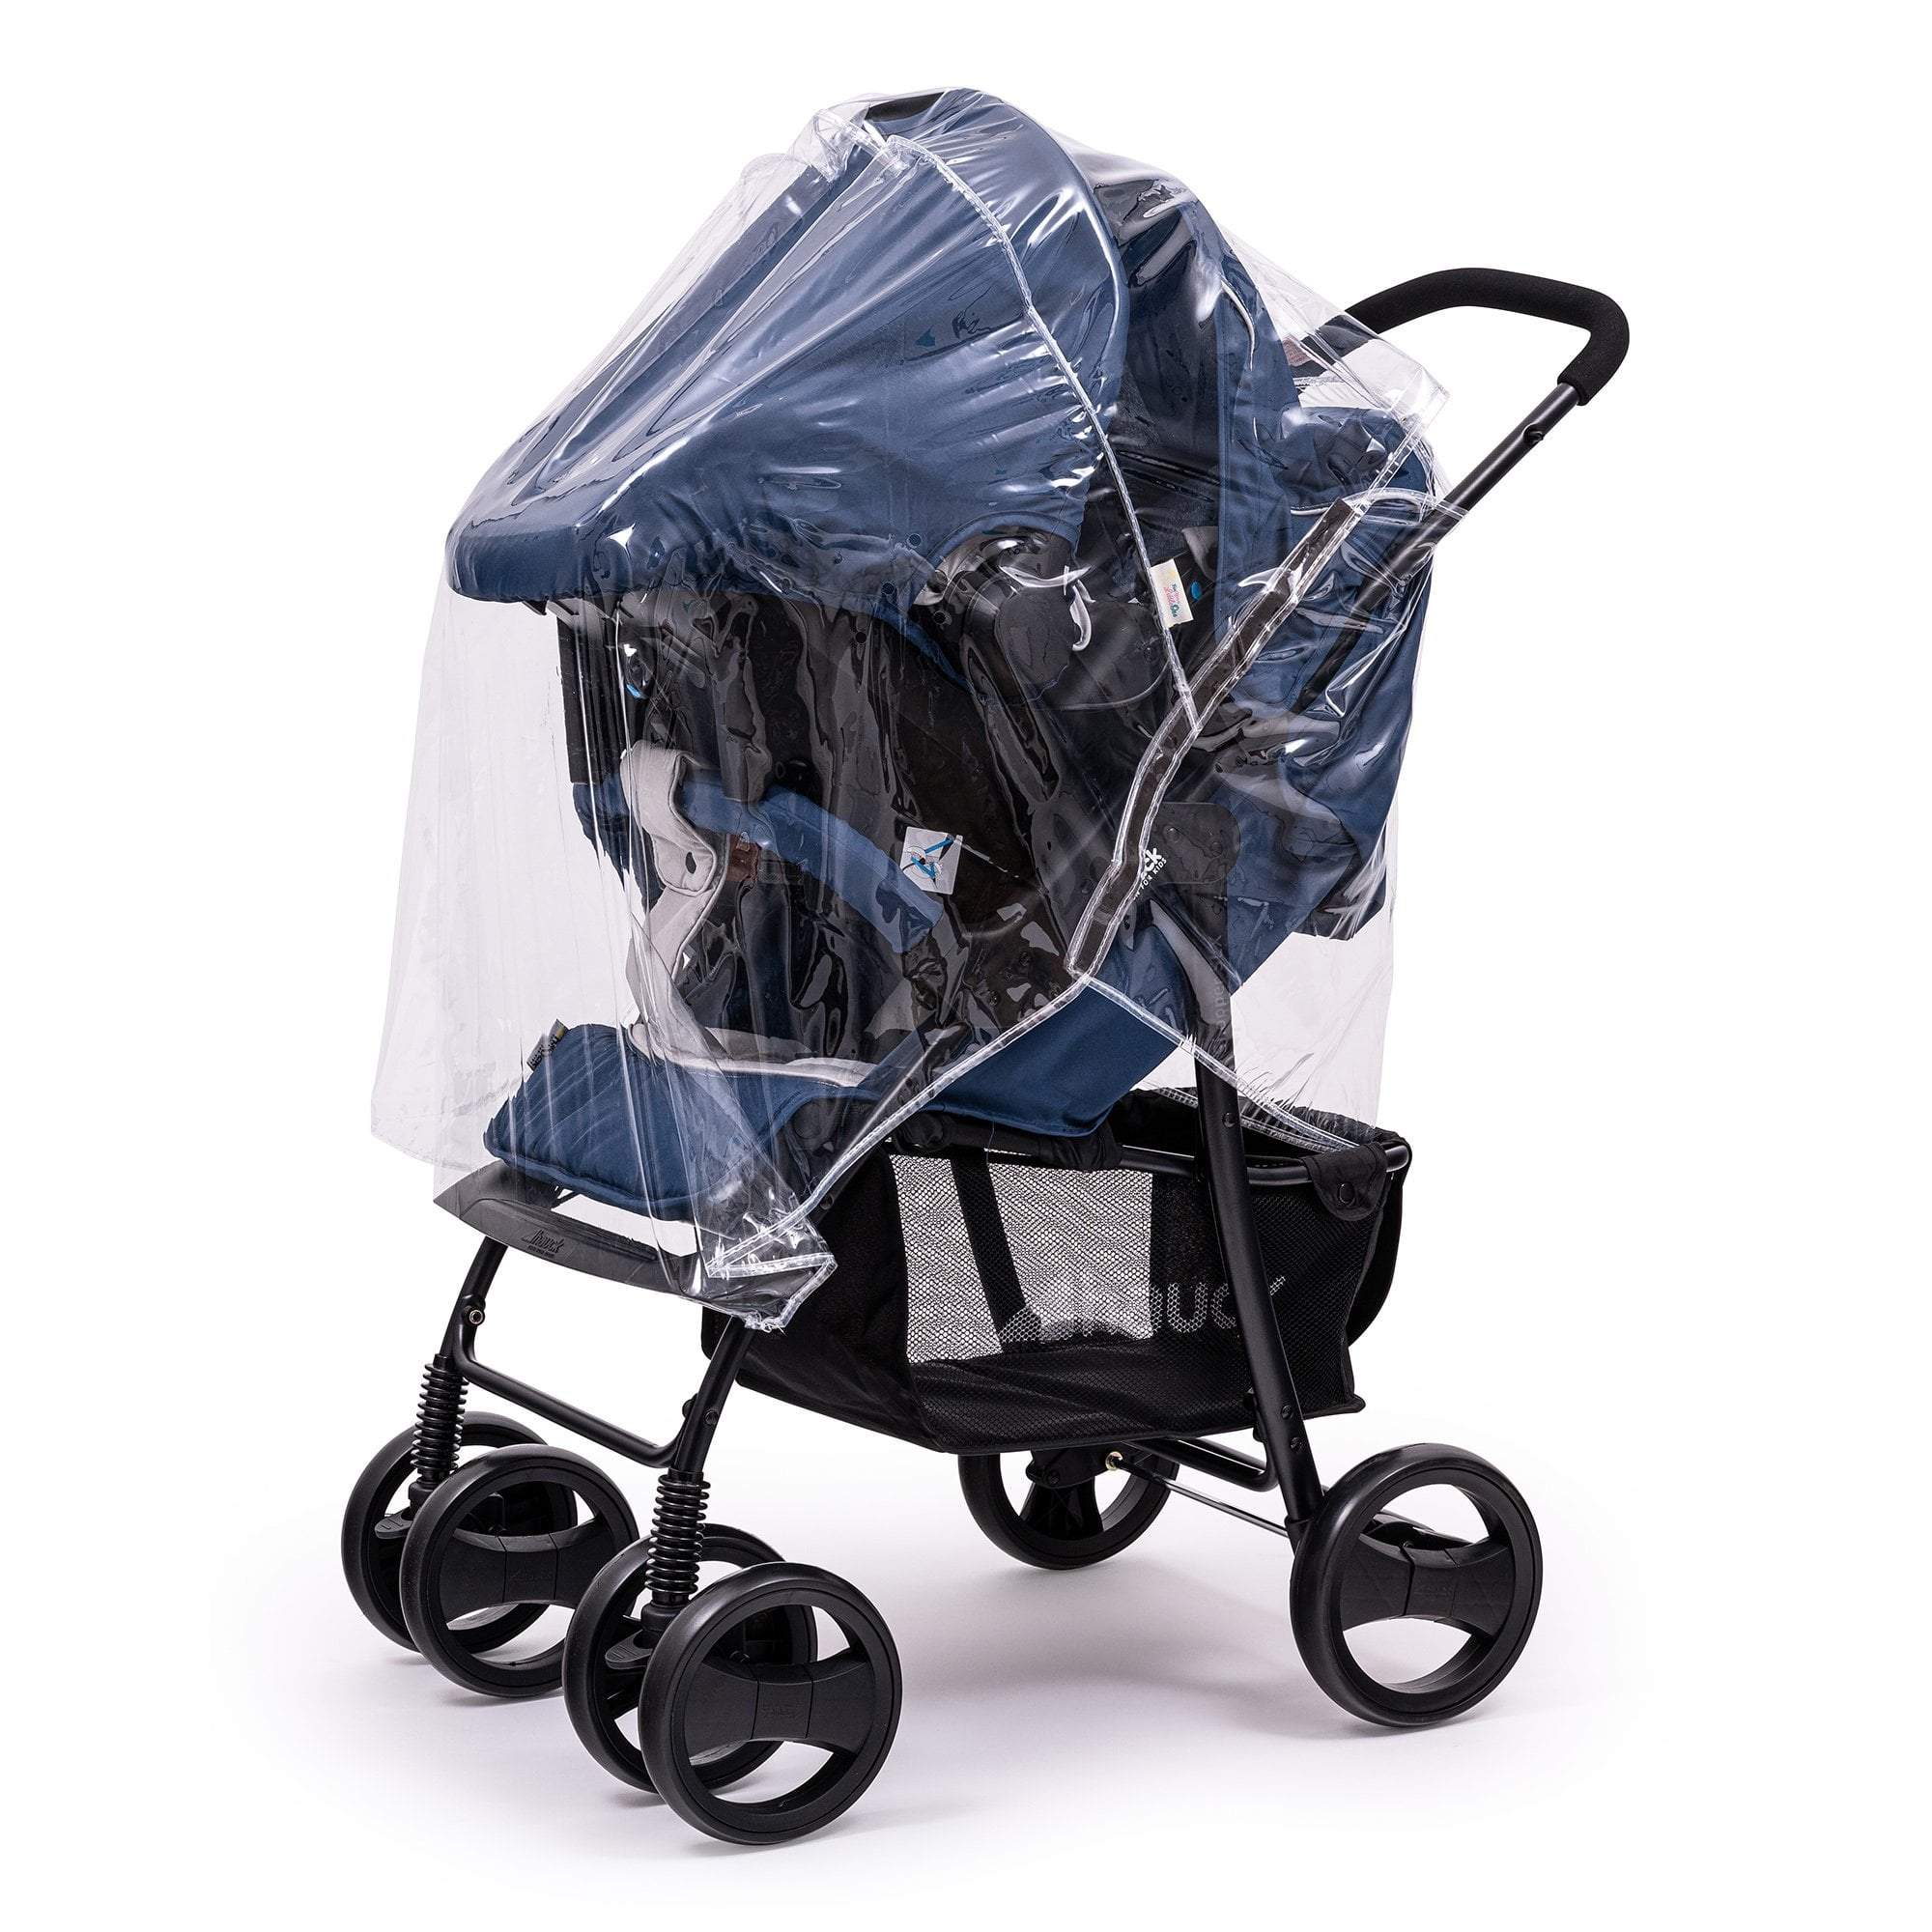 Travel System Raincover Compatible with Baby Elegance - Fits All Models - For Your Little One